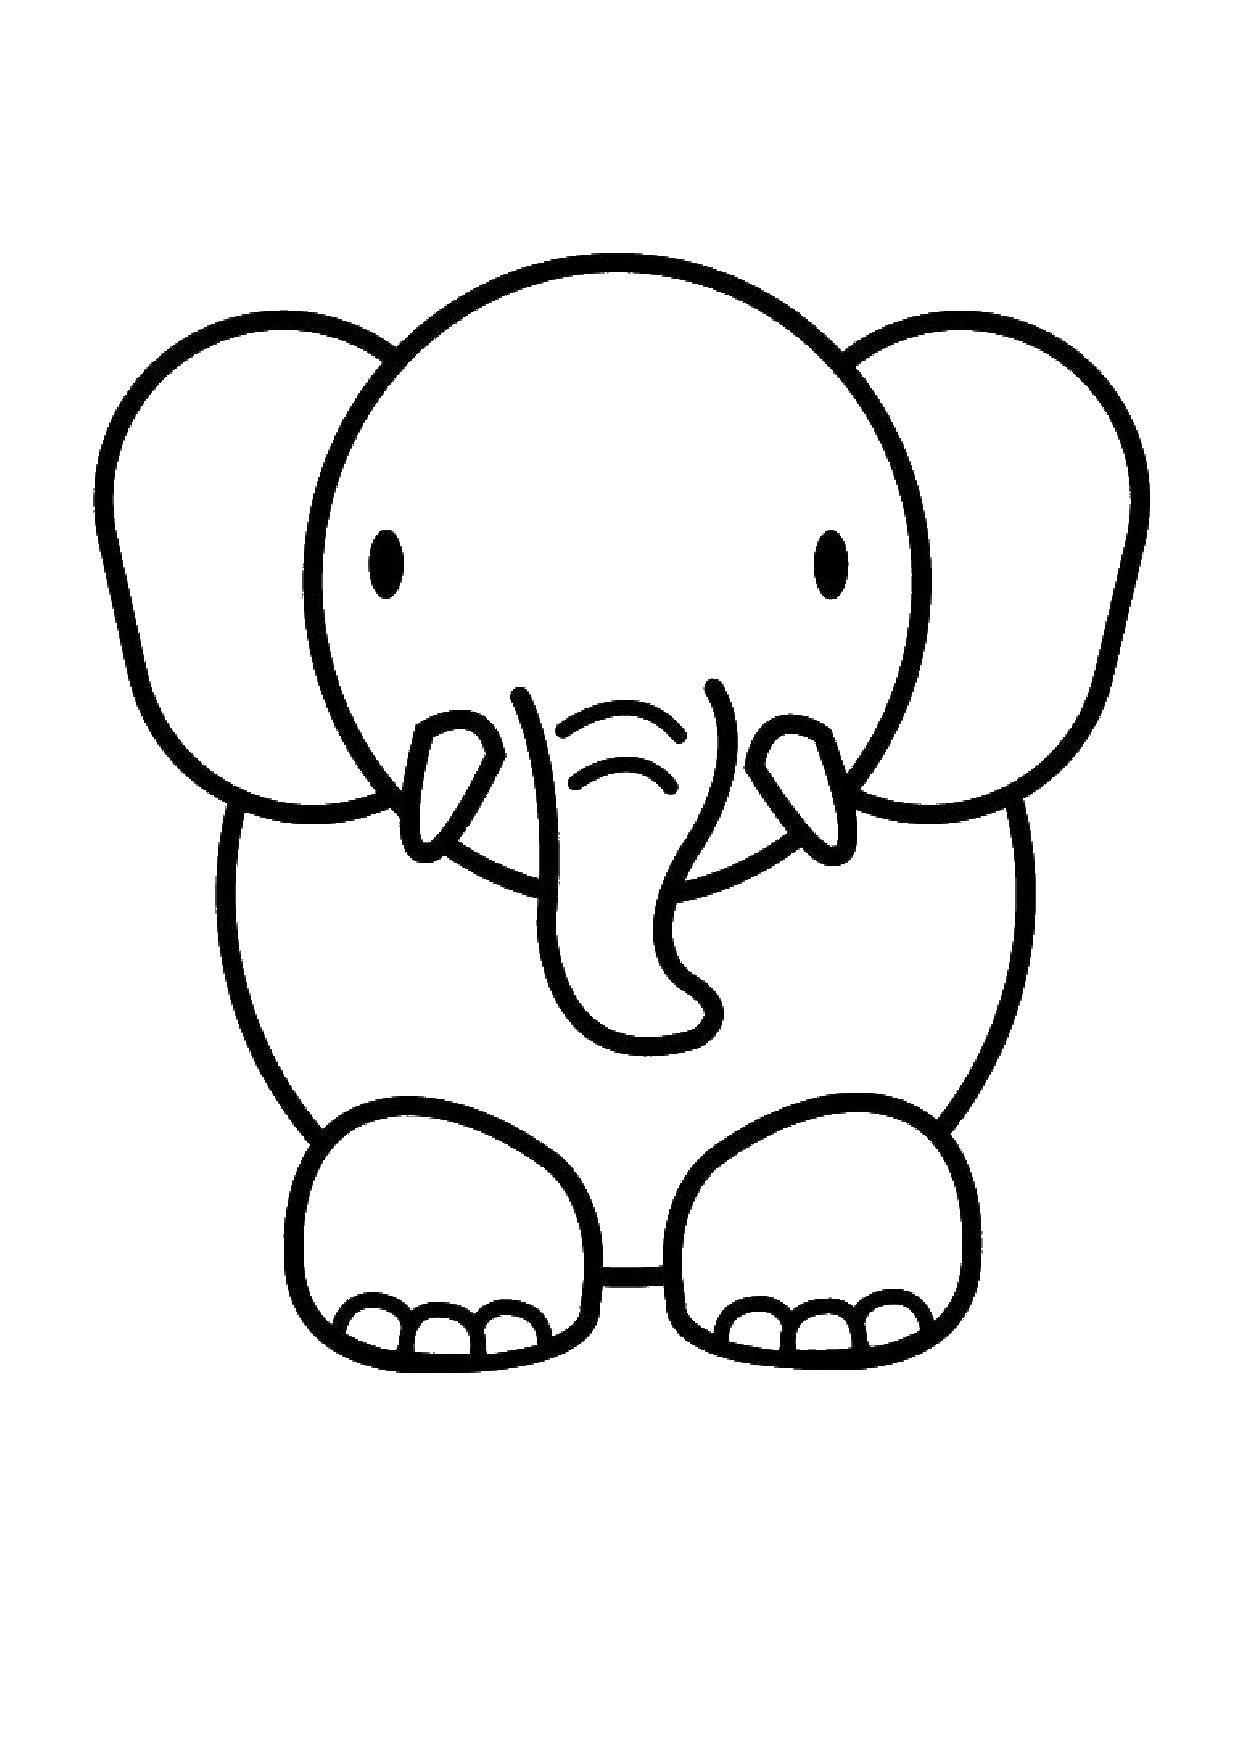 Coloring Elephant. Category Wild animals. Tags:  the elephant outline, .